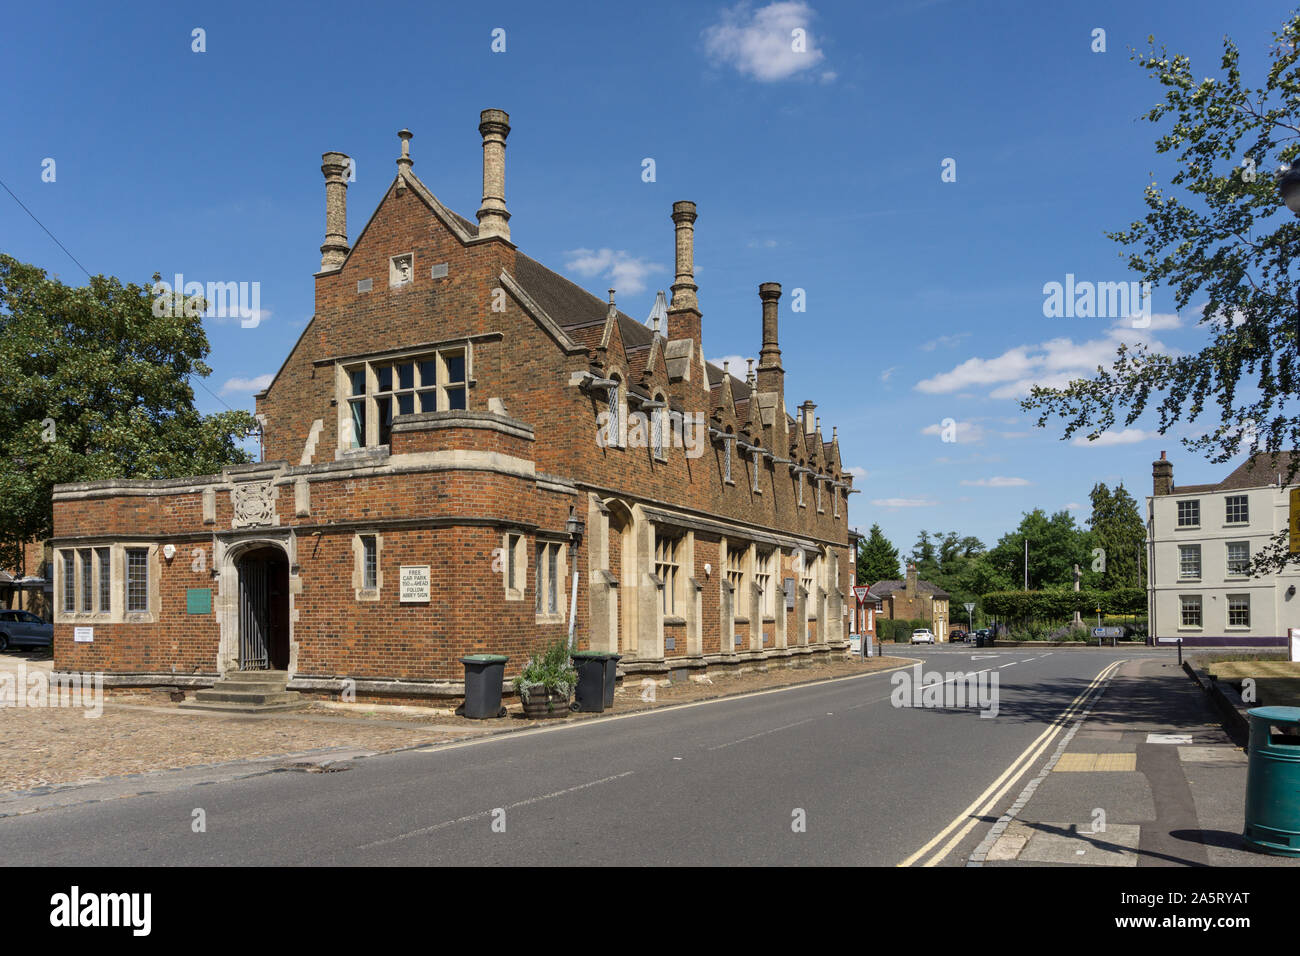 The Town Hall, Woburn, Bedfordshire, UK; built by the Duke Of Bedford in 1830 in a mixture of Jacobean and Elizabethan styles. Stock Photo